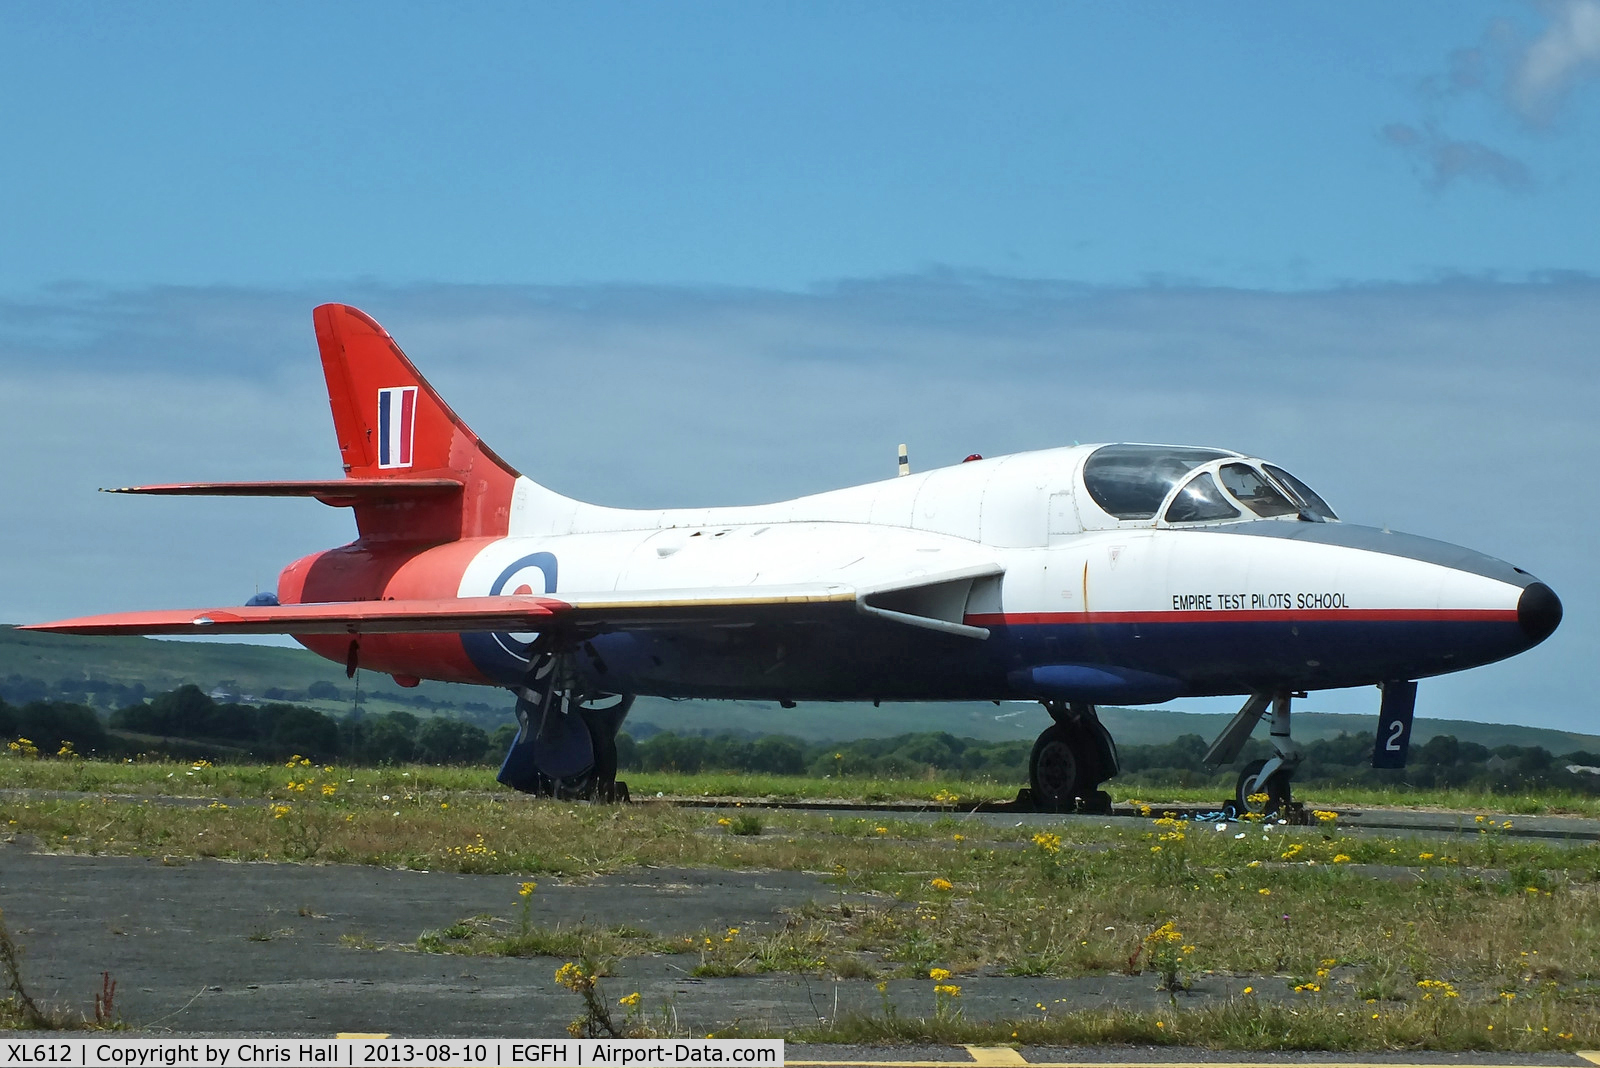 XL612, 1958 Hawker Hunter T.7 C/N 41H-695346, former Empire Test Pilots School now owned by Hunter Flying Ltd